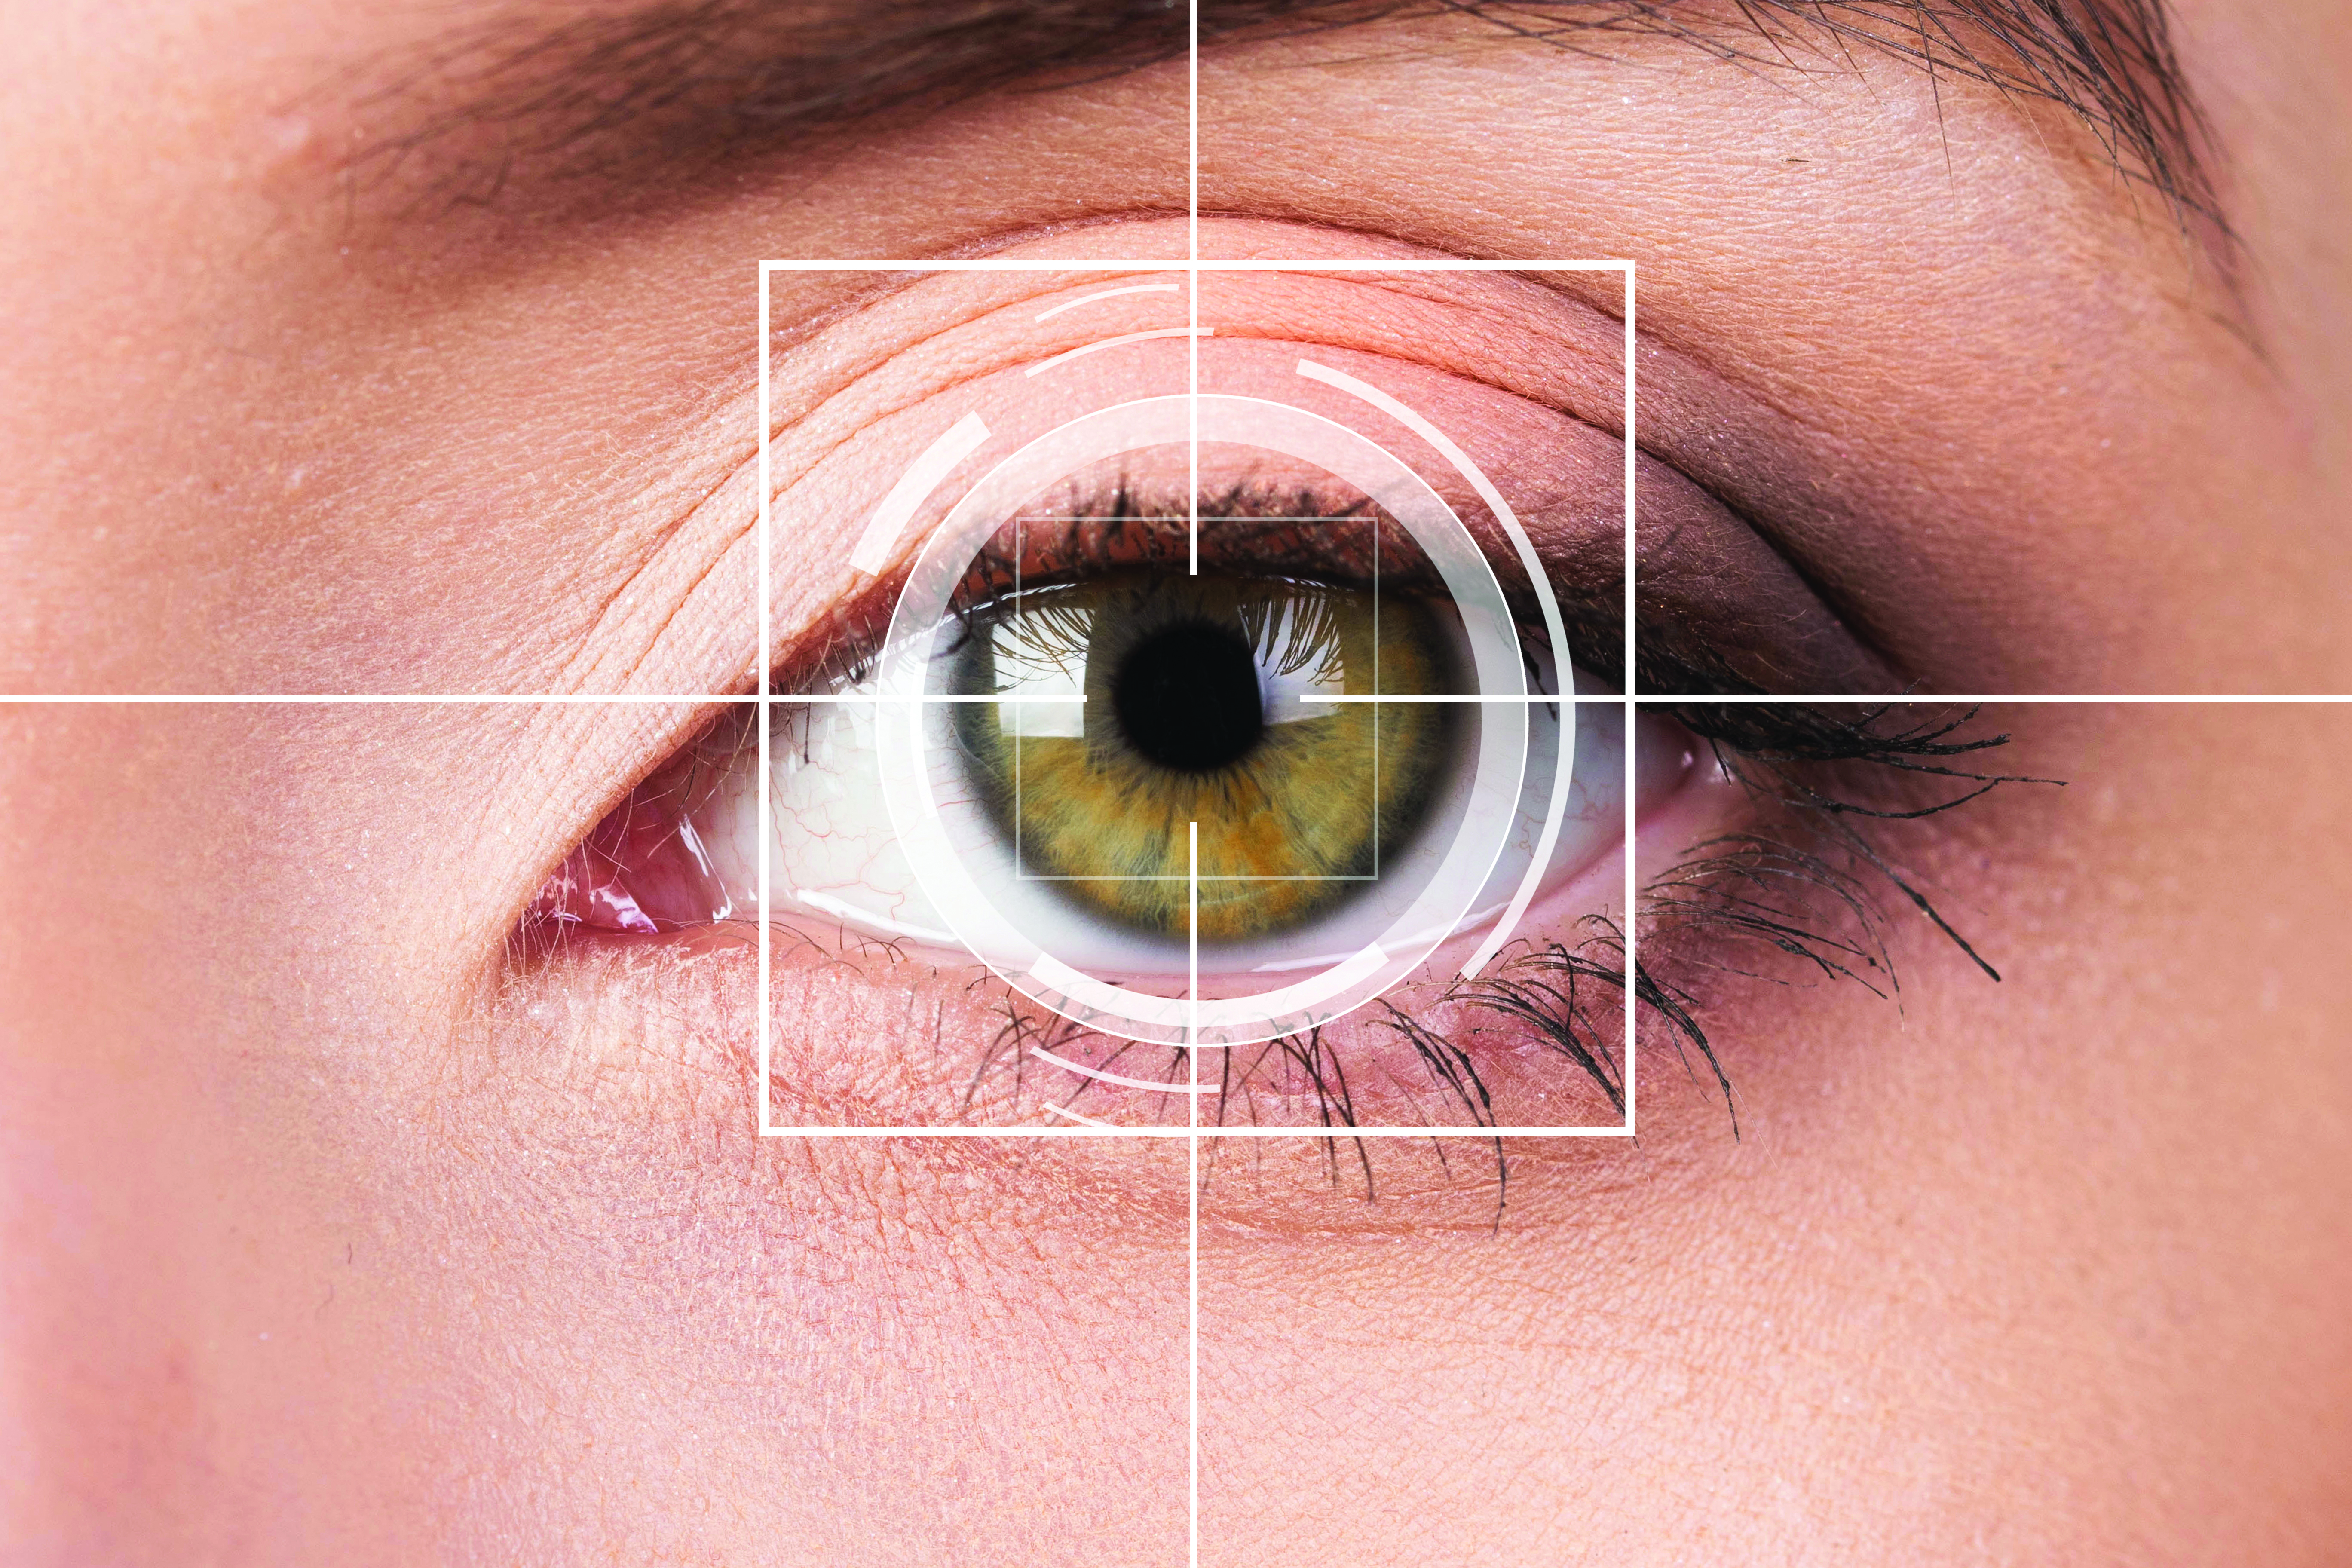 The eye-tracker is used for tracking one's eye movements, gaze points, and fixations.